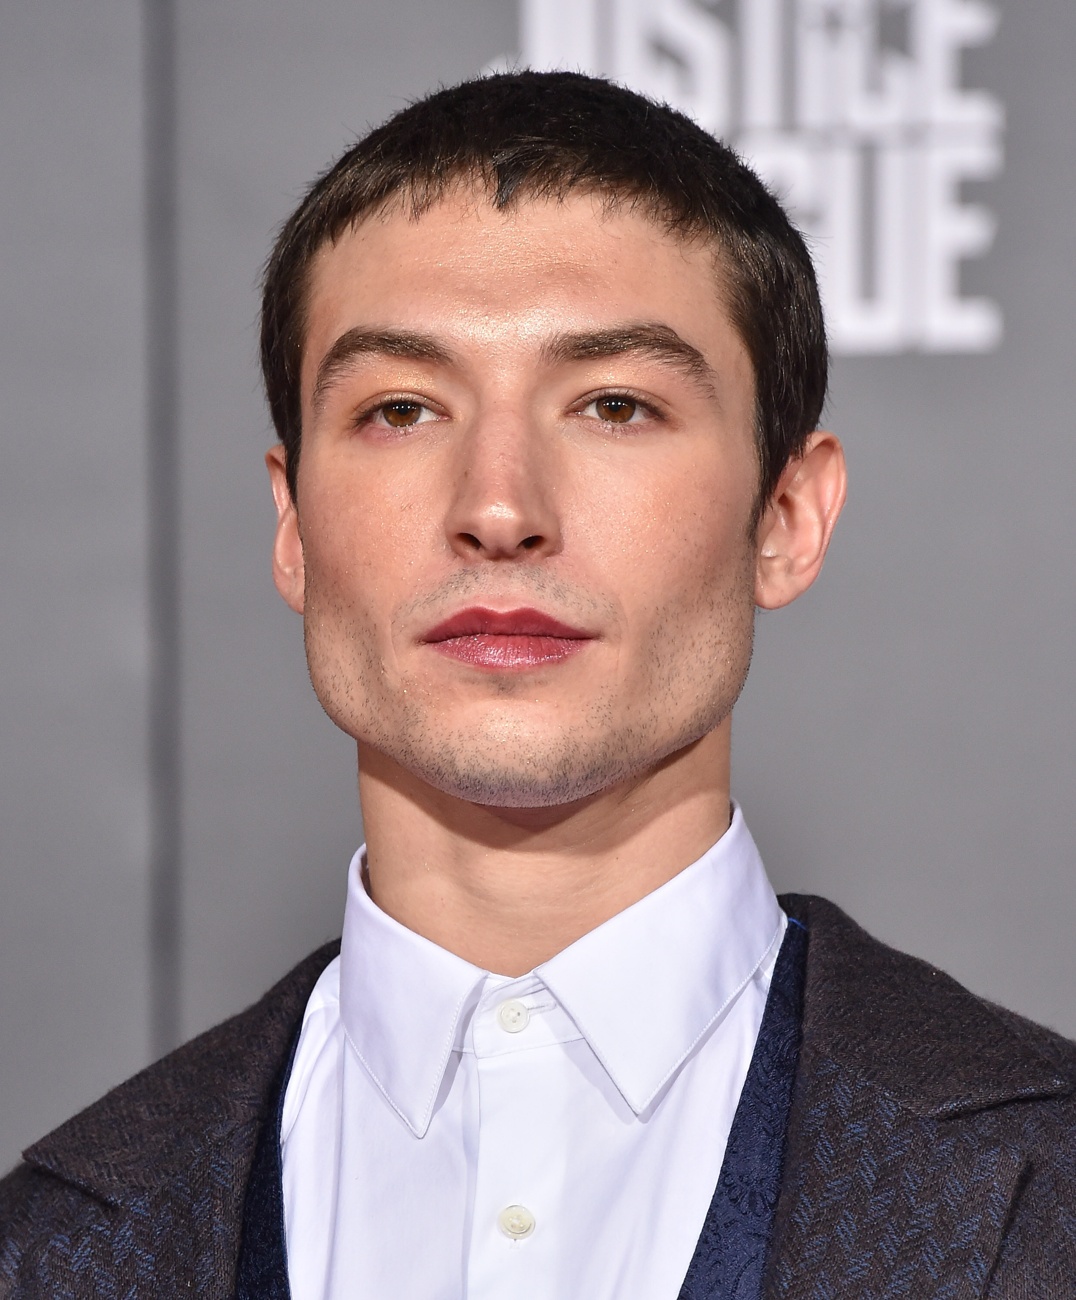 Ezra Miller has stepped out of the media spotlight